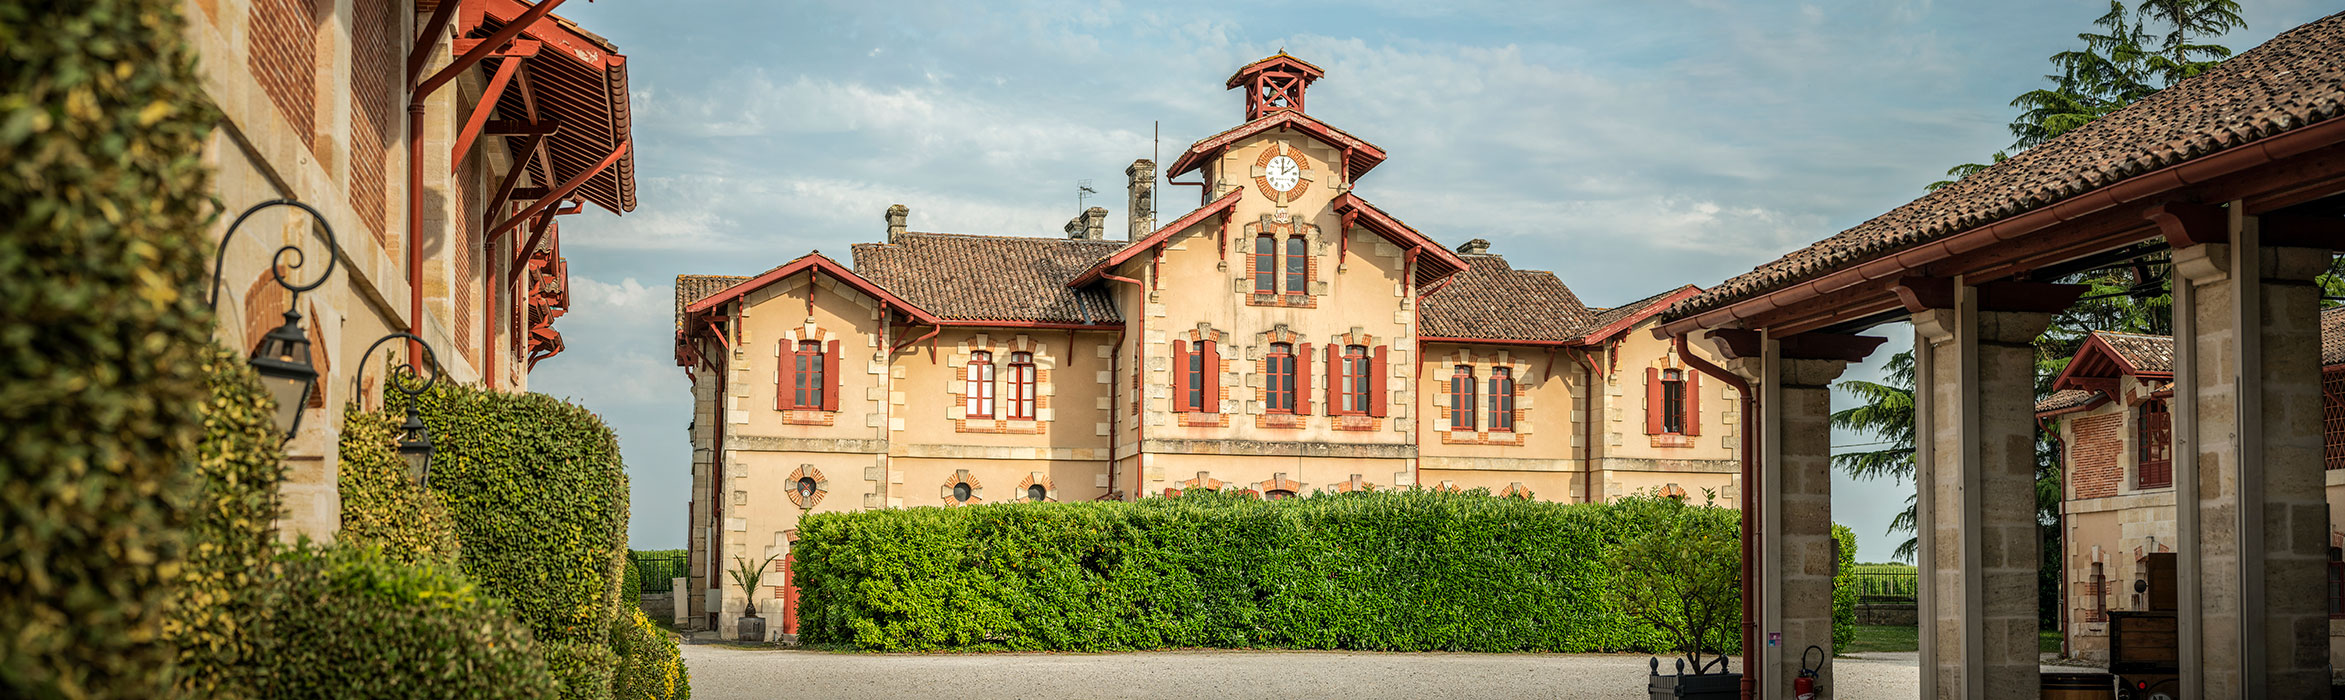 The Suzanne farm of Château Giscours